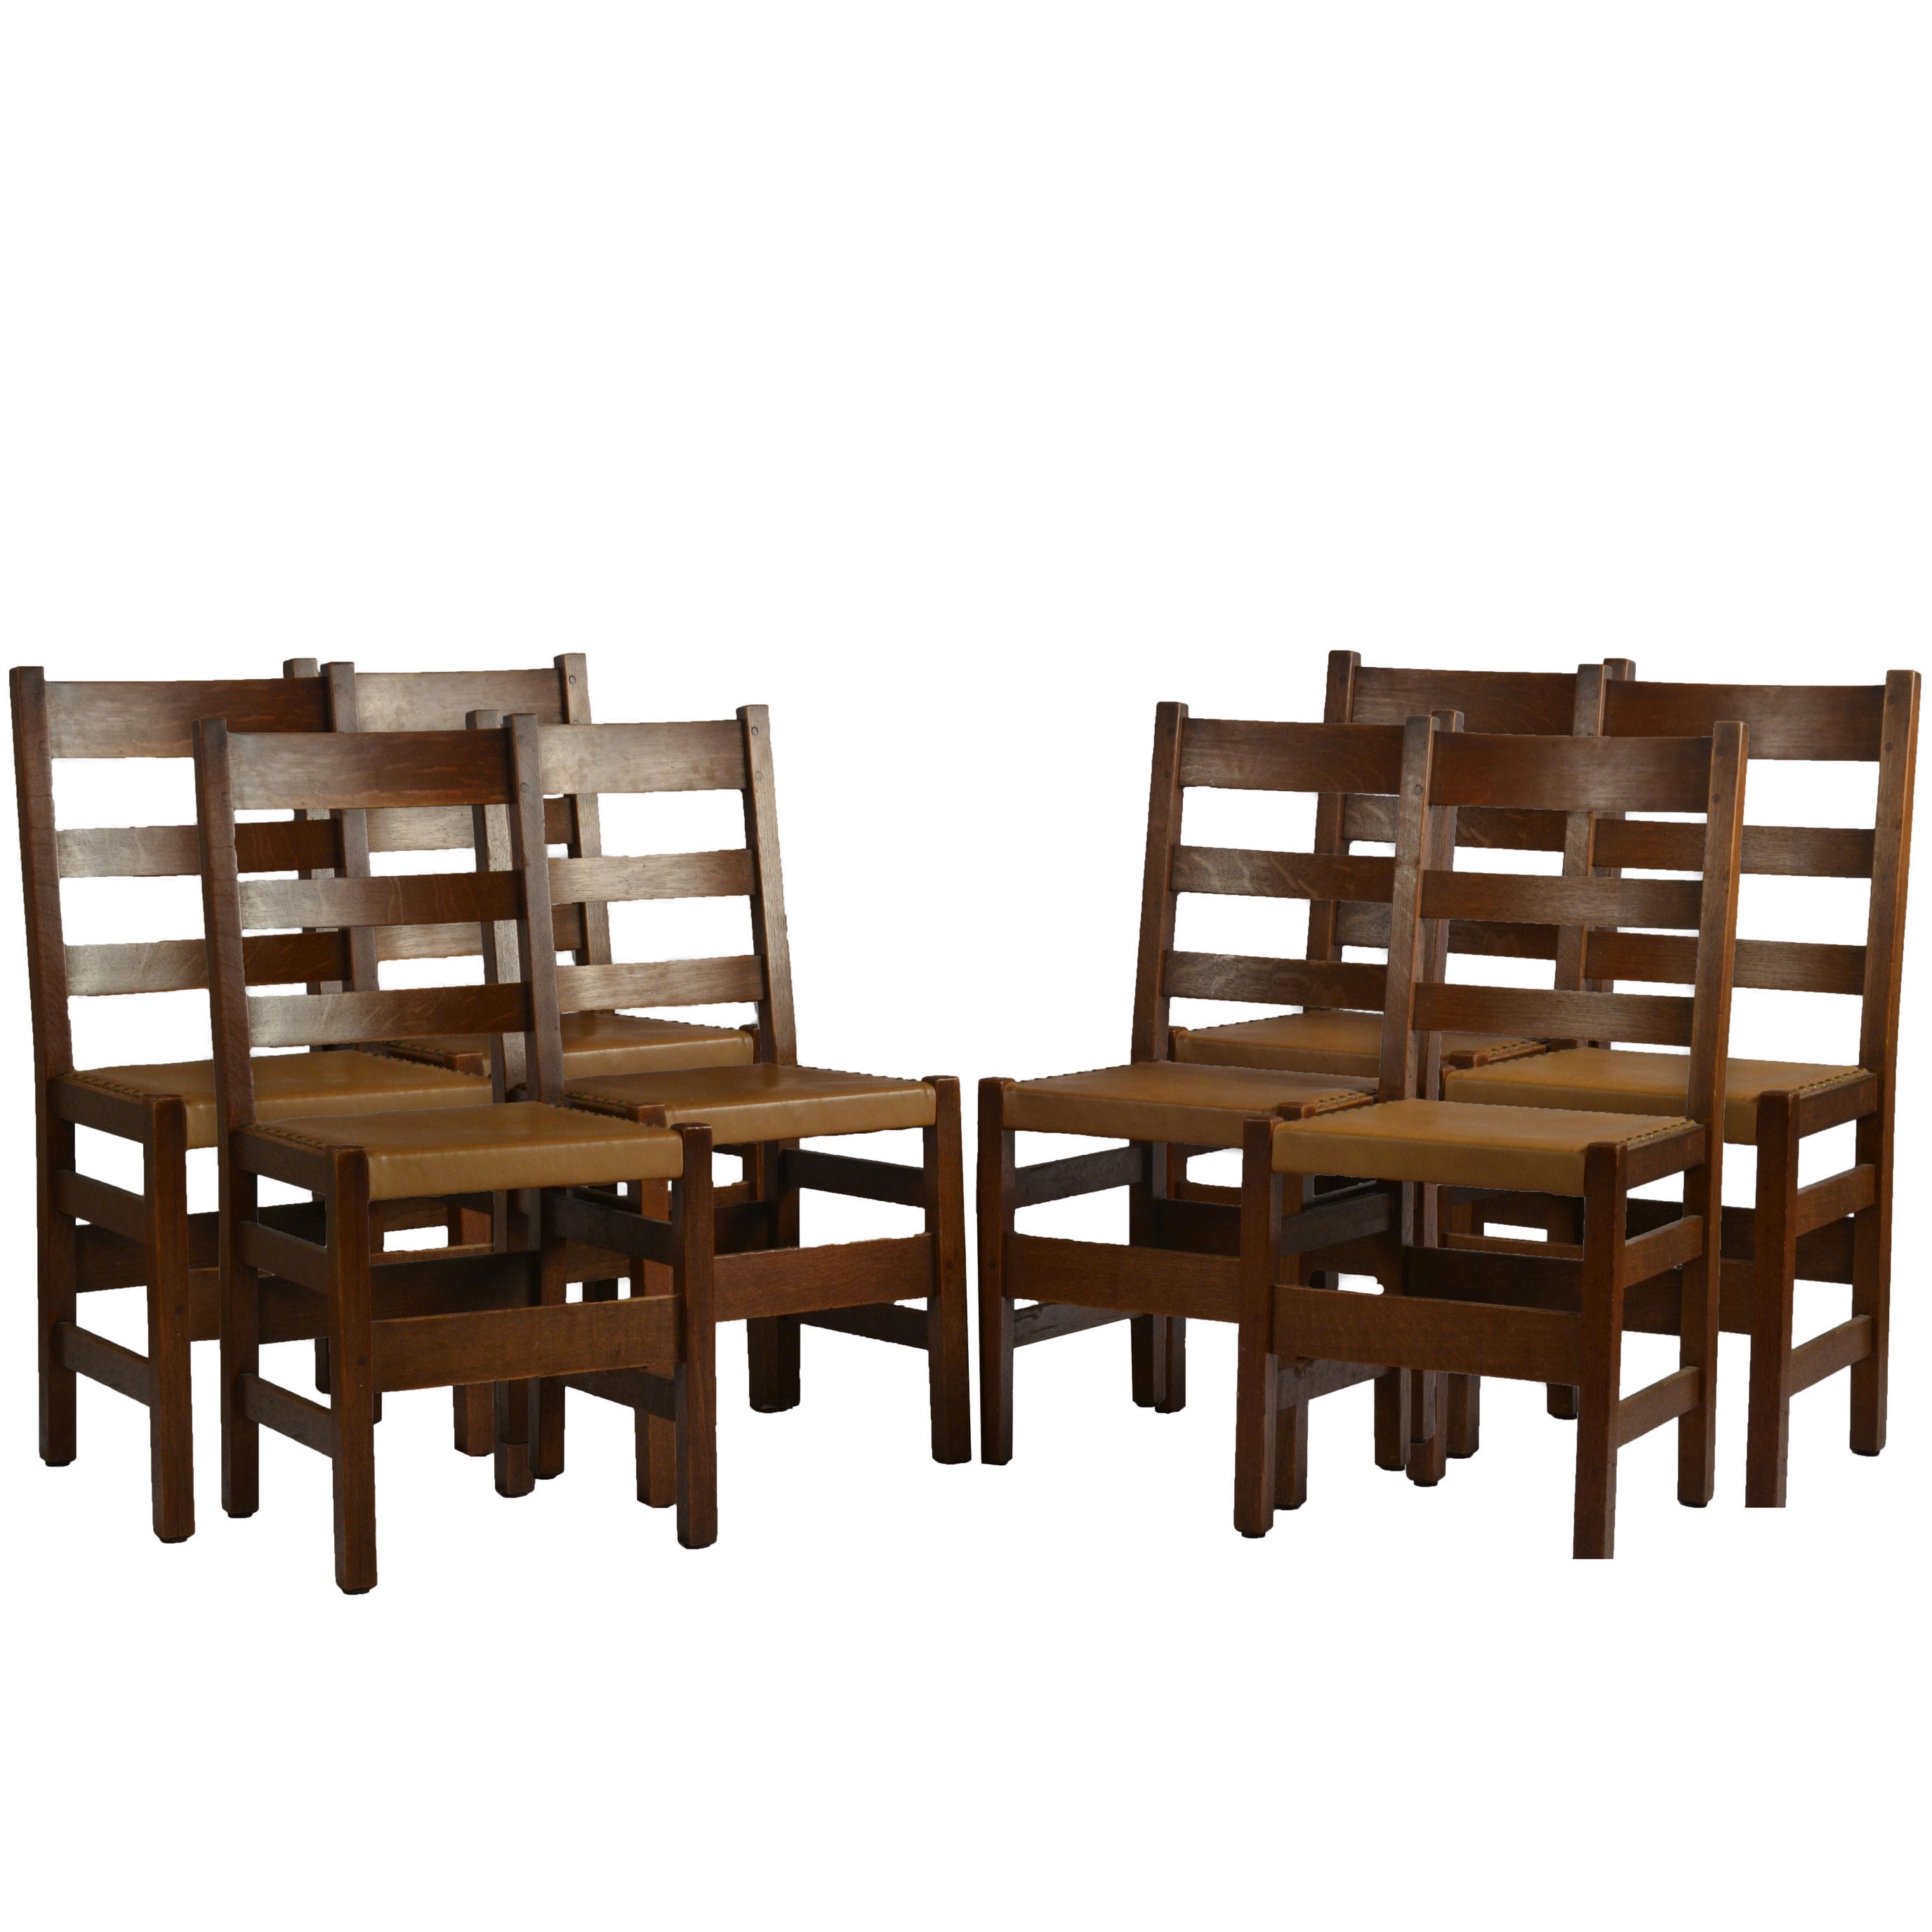 Set of Eight Stickley Arts & Crafts Chairs